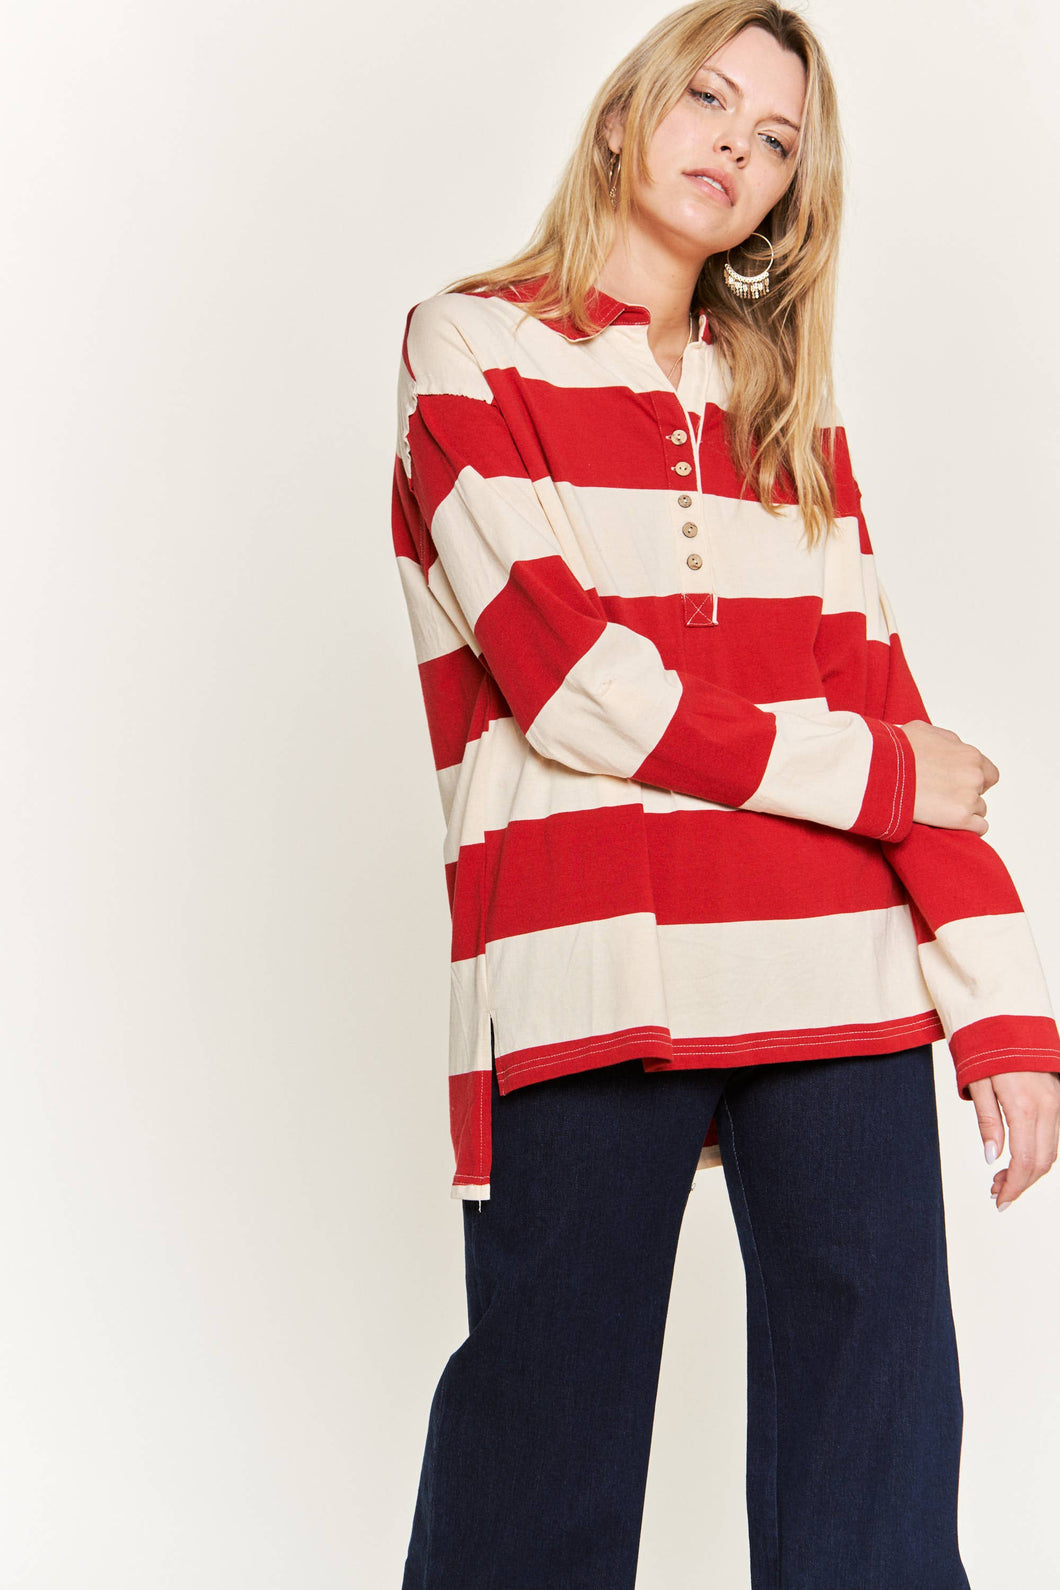 Jersey knit Allover striped Long sleeve Top CREAM/RED